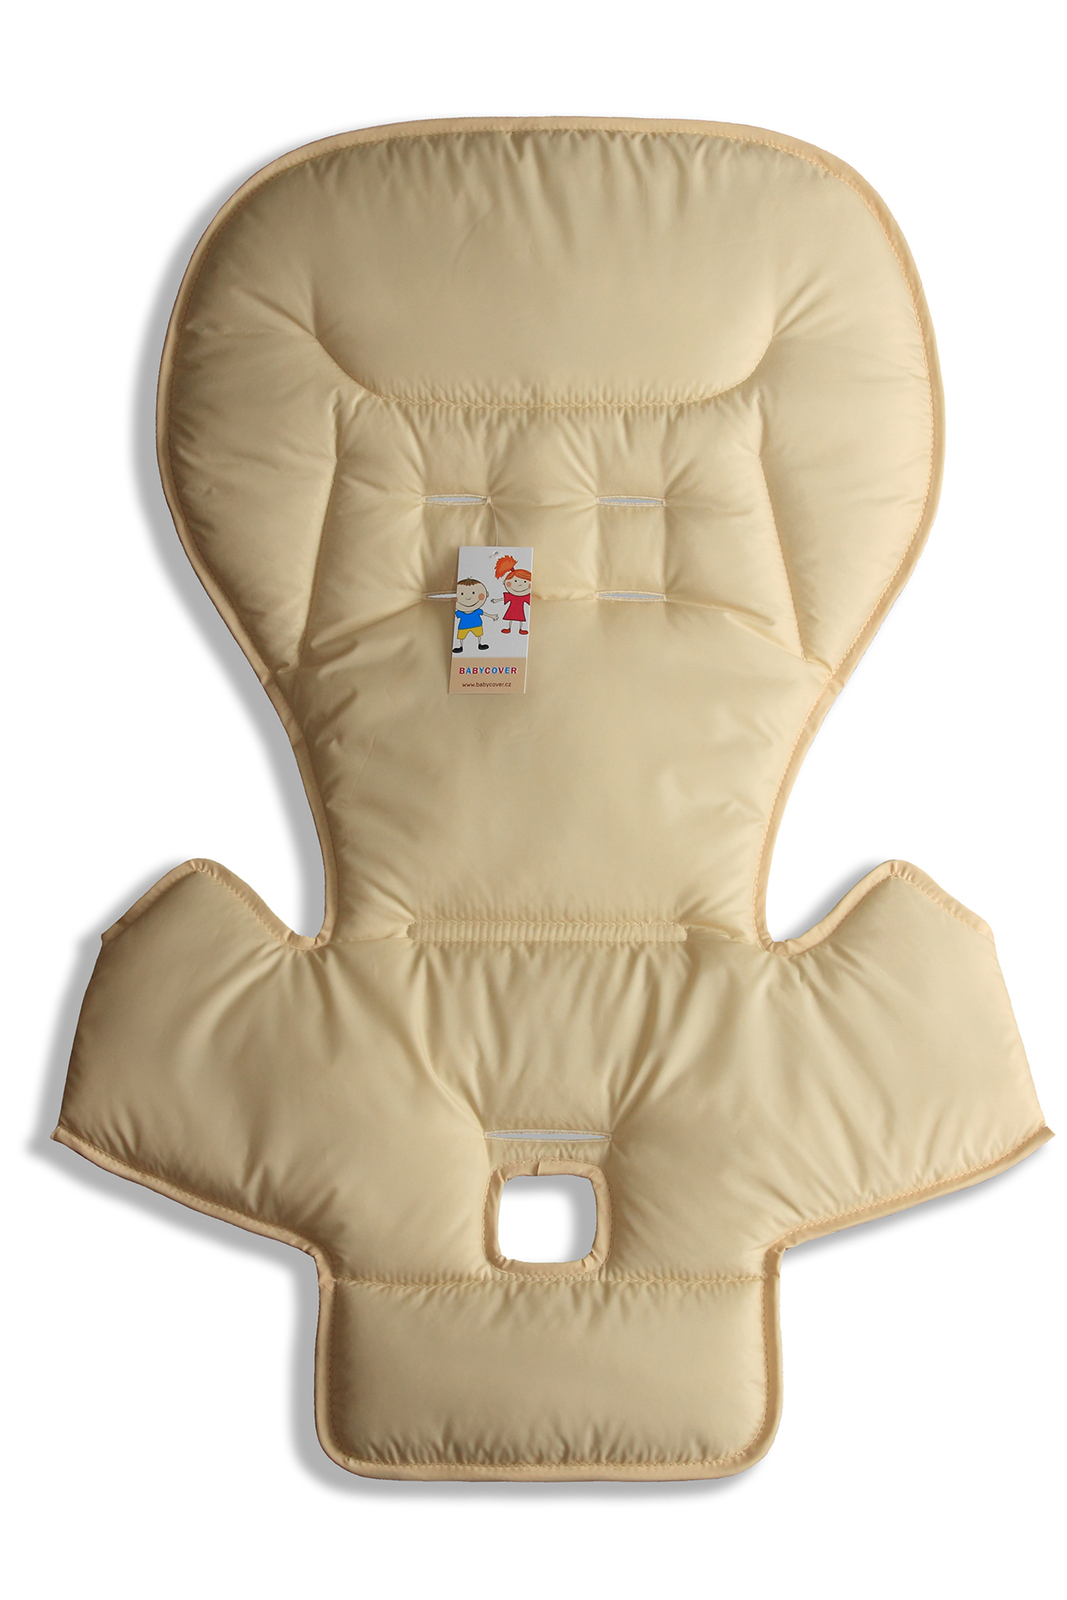 The seat pad cover for highchair Peg Perego Prima Pappa Diner 